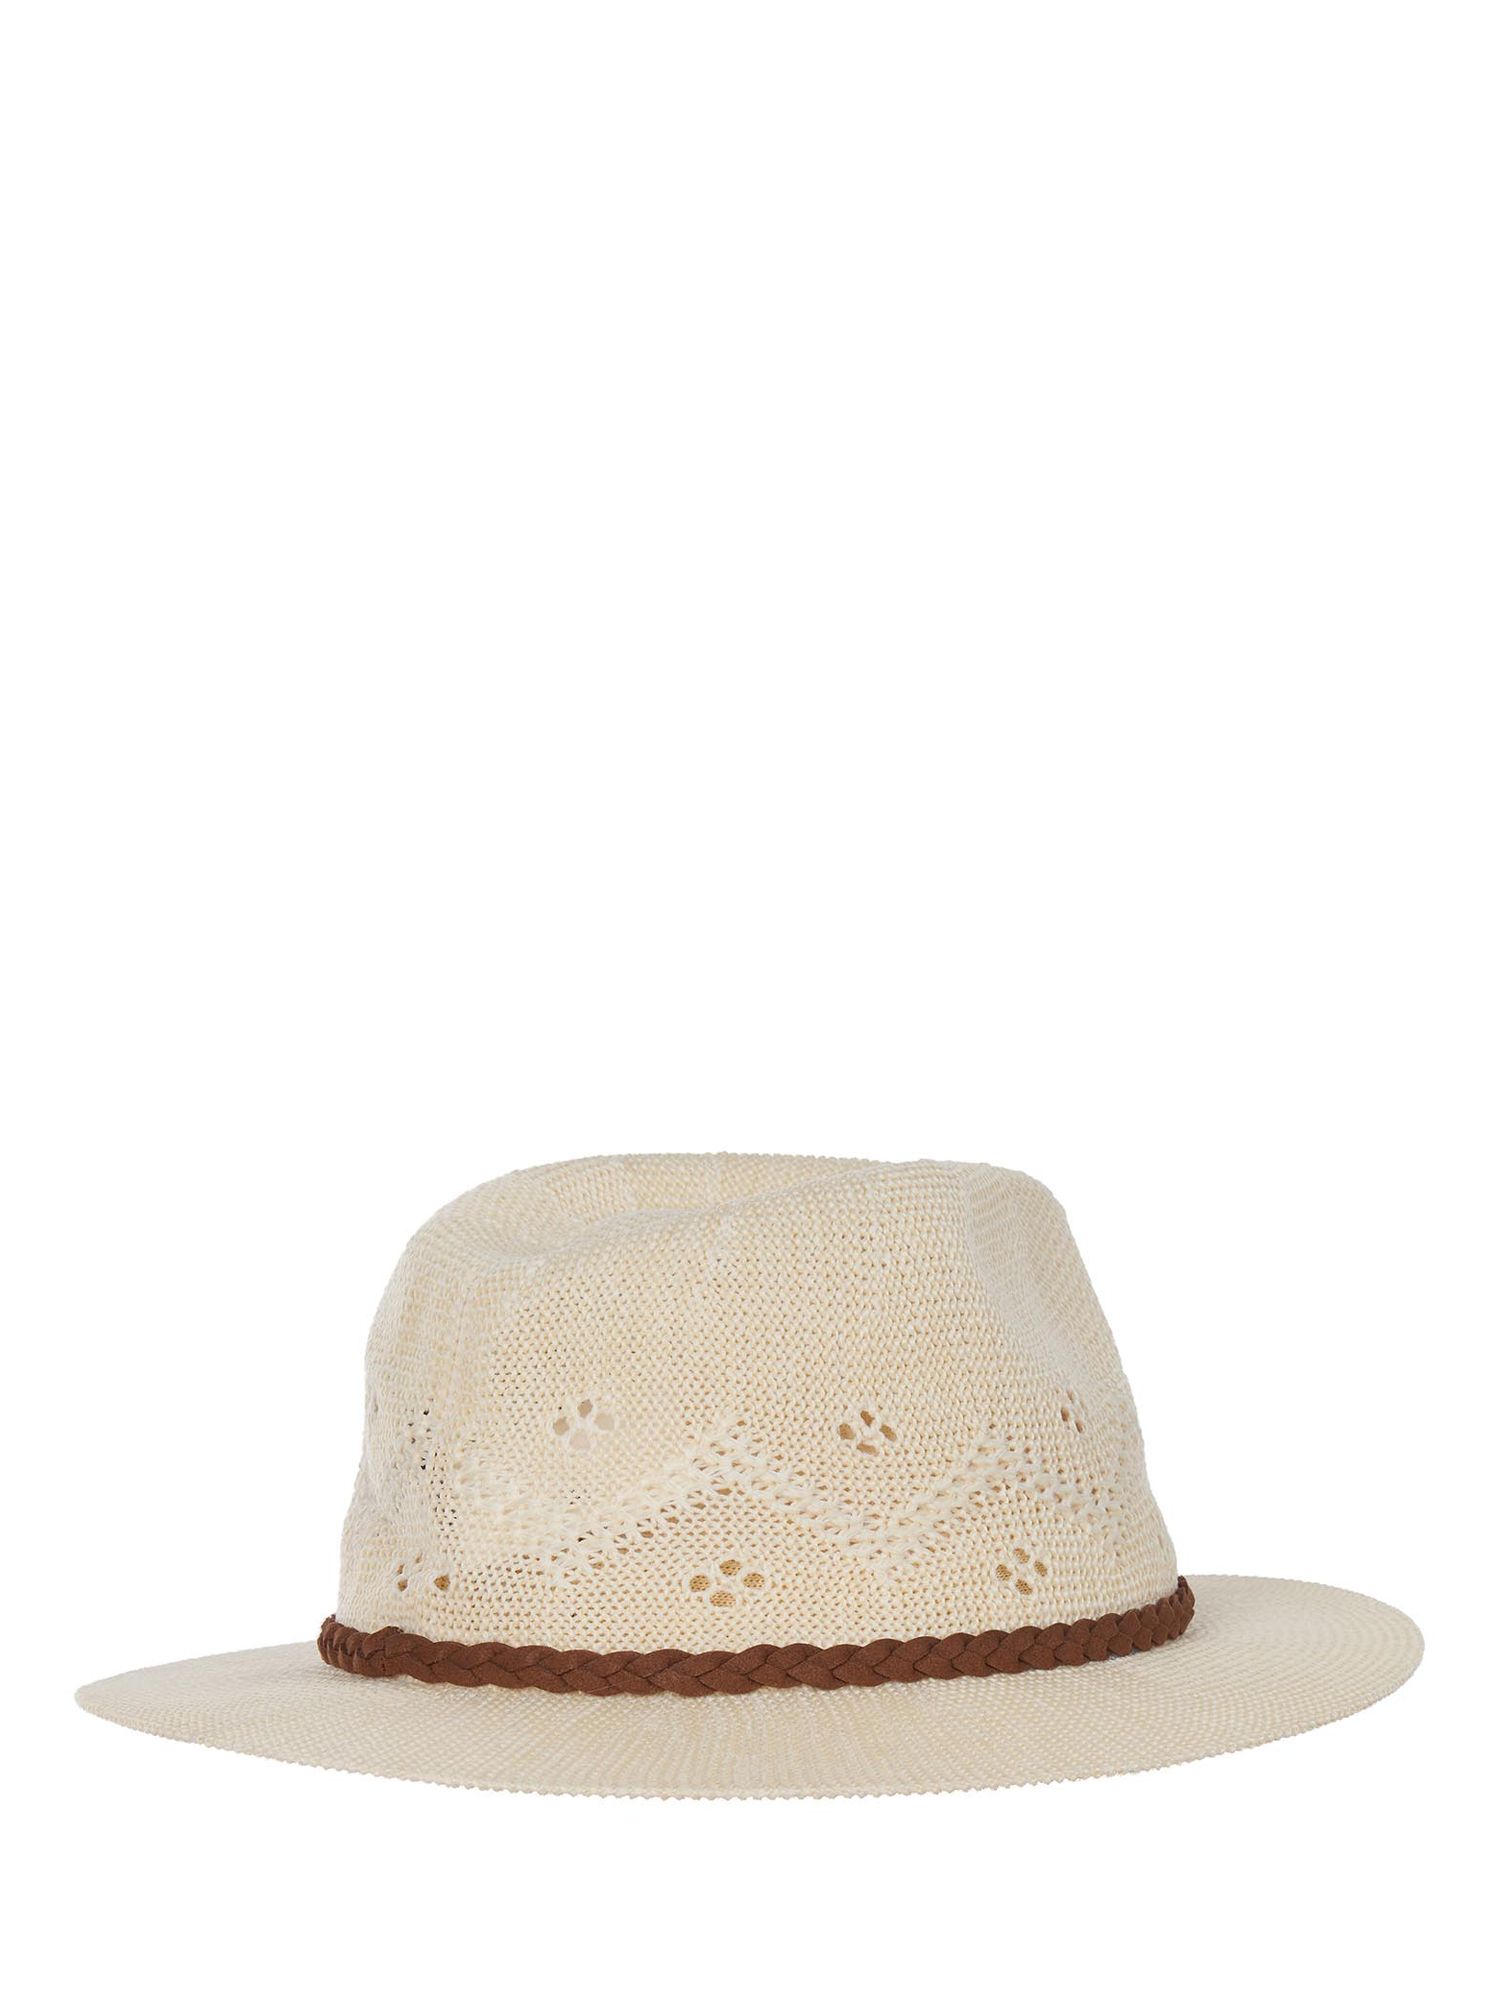 Buy Barbour Flowerdale Trilby Hat, Ivory Online at johnlewis.com